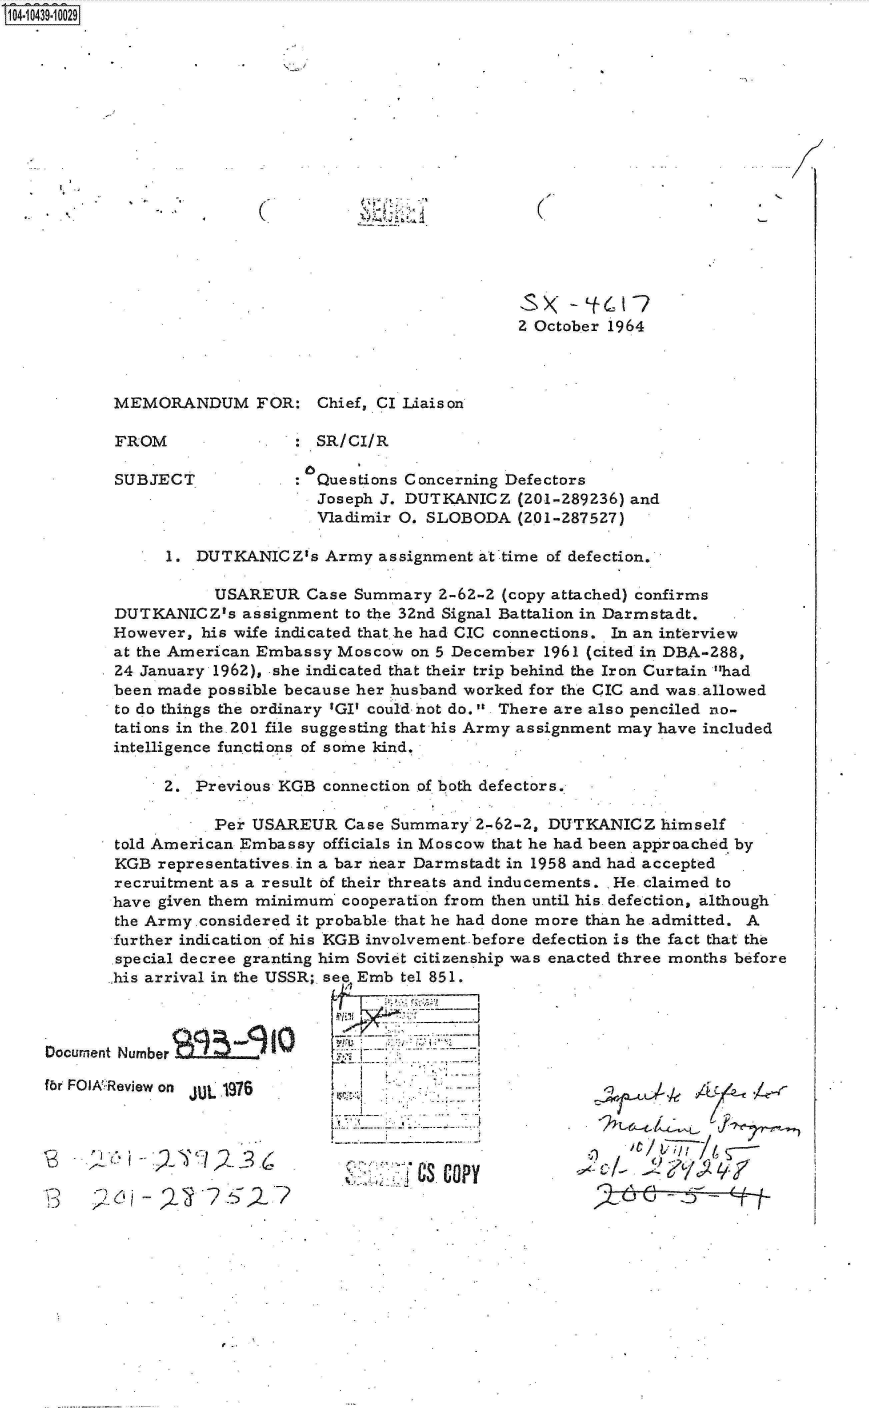 handle is hein.jfk/jfkarch19850 and id is 1 raw text is: S1O4~iO439~1OO29


(


(


2 October 1964


MEMORANDUM FOR: Chief, CI Liaison

FROM             .    SR/CI/R

SUBJECT: Questions Concerning Defectors
                      Joseph J. DUTKANICZ   (O-289236)  and
                      Vladimir 0. SLOBODA   (201-287527)

      1. DUTKANICZ's   Army  assignment at time of defection.

           USAREUR   Case Summary  2-62-2 (copy attached) confirms
 DUTKANICZ's  assignment to the 32nd Signal Battalion in Darmstadt.
 However, his wife indicated that he had CIC connections. In an interview
 at the American Embassy Moscow on 5 December  1961 (cited in DBA-288,
 24 January 1962), she indicated that their trip behind the Iron Curtain had
 been made possible because her husband worked for the CIC and was.allowed
 to do things the ordinary 'GI' could not do. There are also penciled no-
 tations in the. 201 file suggesting that his Army assignment may have included
 intelligence functions of some kind.

      2. Previous KGB  connection of both defectors.

           Per USAREUR   Case Summary  2-62-2, DUTKANICZ   himself
 told American Embassy officials in Moscow that he had been approached by
 KGB representatives in a bar near Darmstadt in 1958 and had accepted
 recruitment as a result of their threats and inducements. He claimed to
 have given them minimum cooperation from then until his. defection, although
 the Army.considered it probable that he had done more than he admitted. A
 further indication of his KGB involvement.before defection is the fact that the
 special decree granting him Soviet citizenship was enacted three months before
 his arrival in the USSR; see Emb tel 851.



 Number

Review on JUL 1976


AS COPY


it    ---


Qj5 2j~c/,3.6


Documnent

fbr FOI:I


